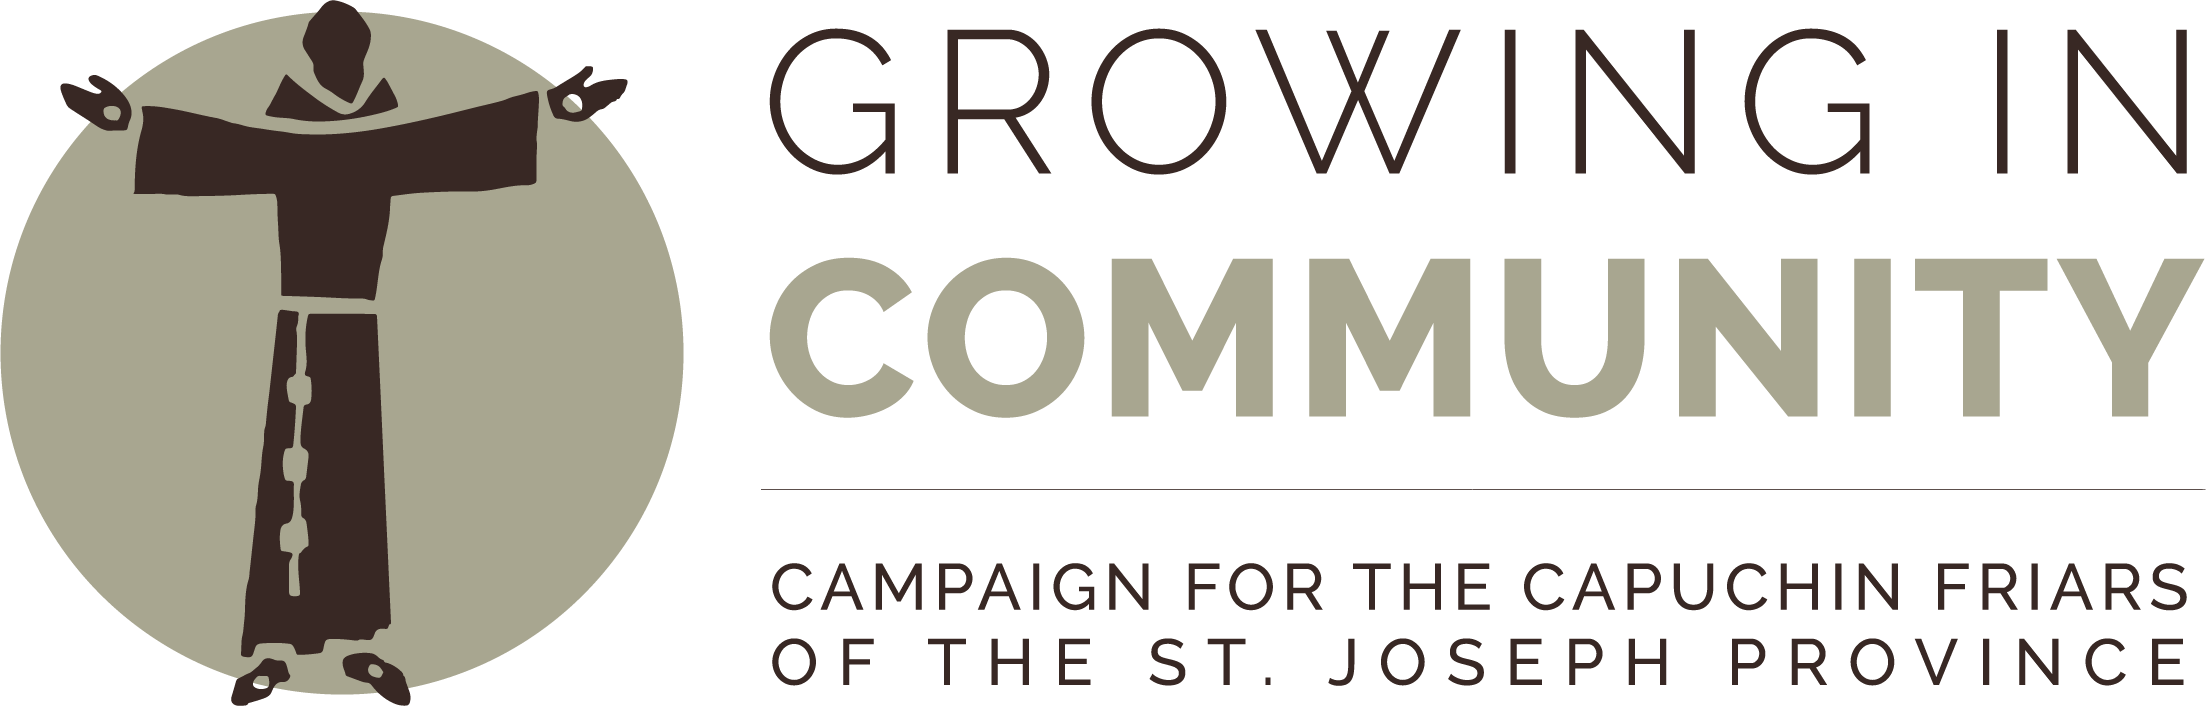 Growing in Community campaign logo